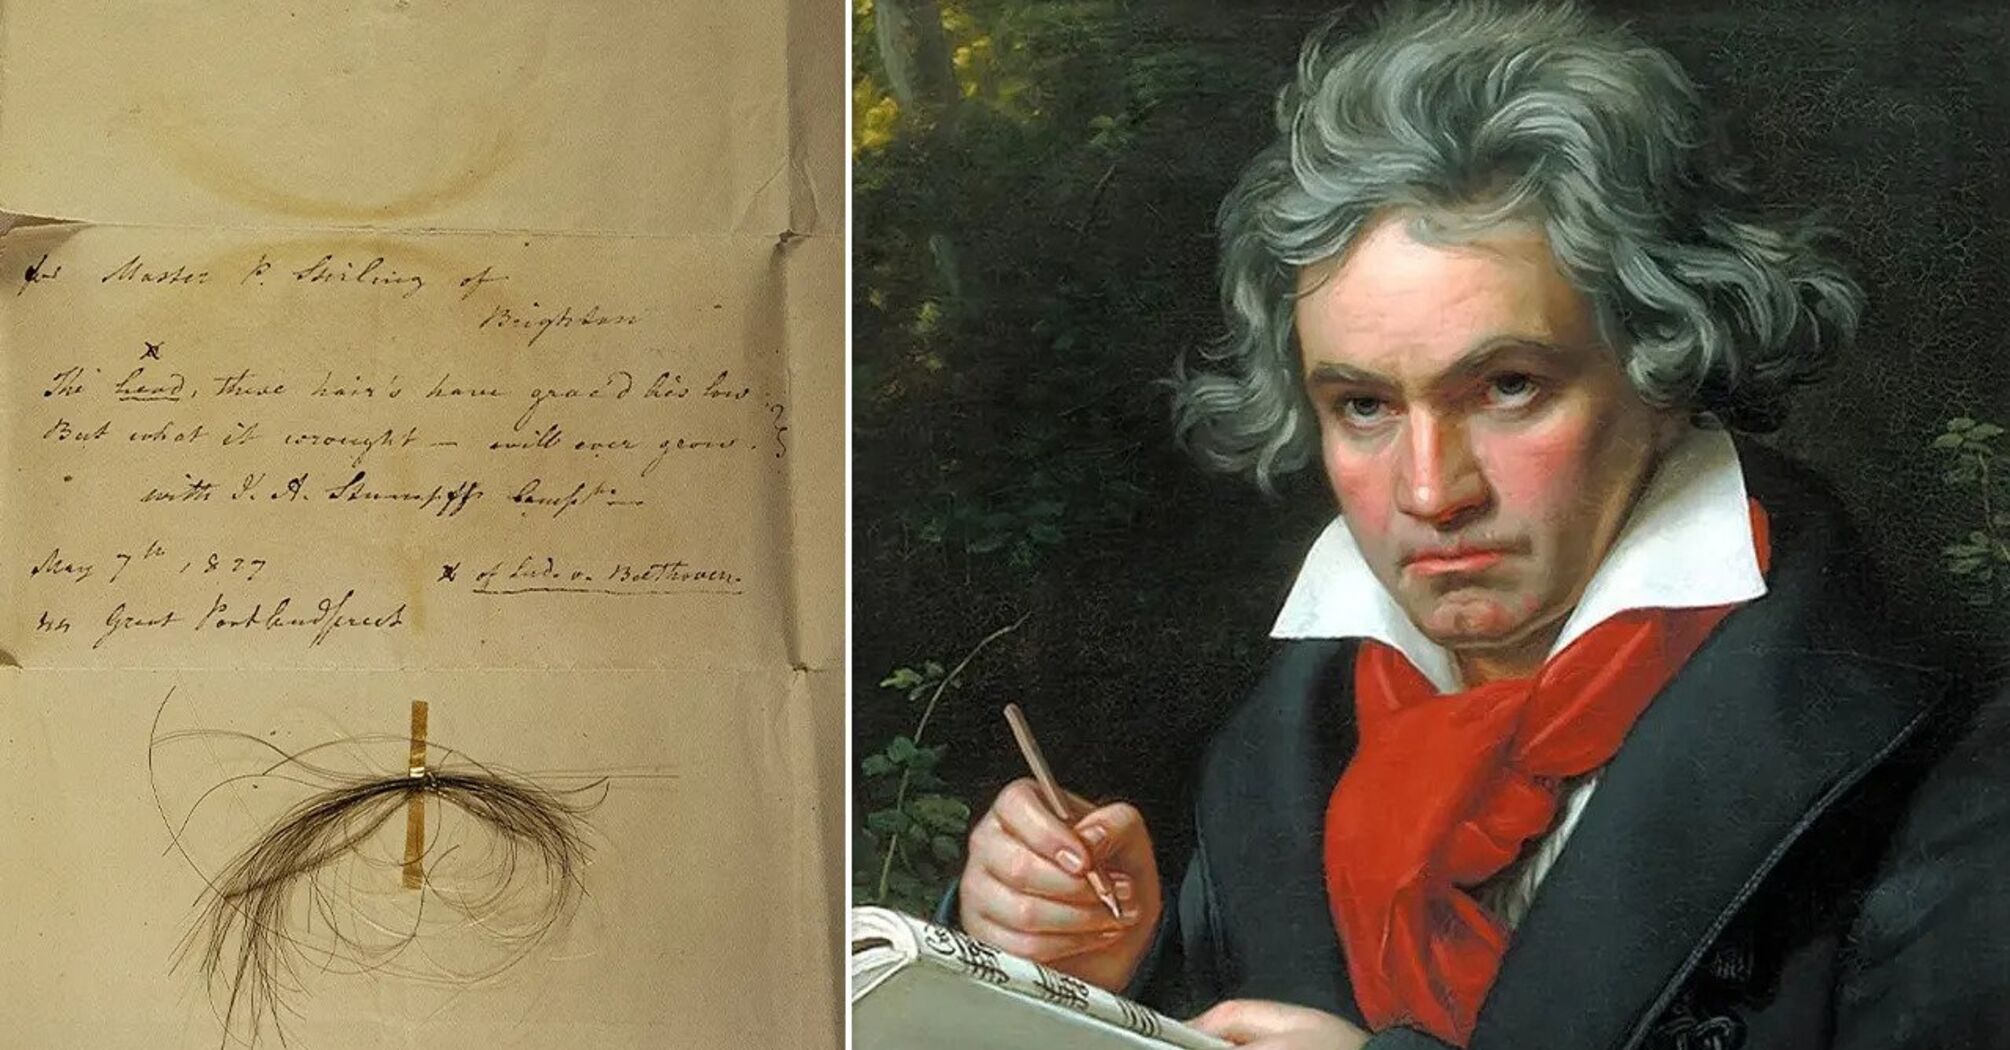 Primary cause of Beethoven's death